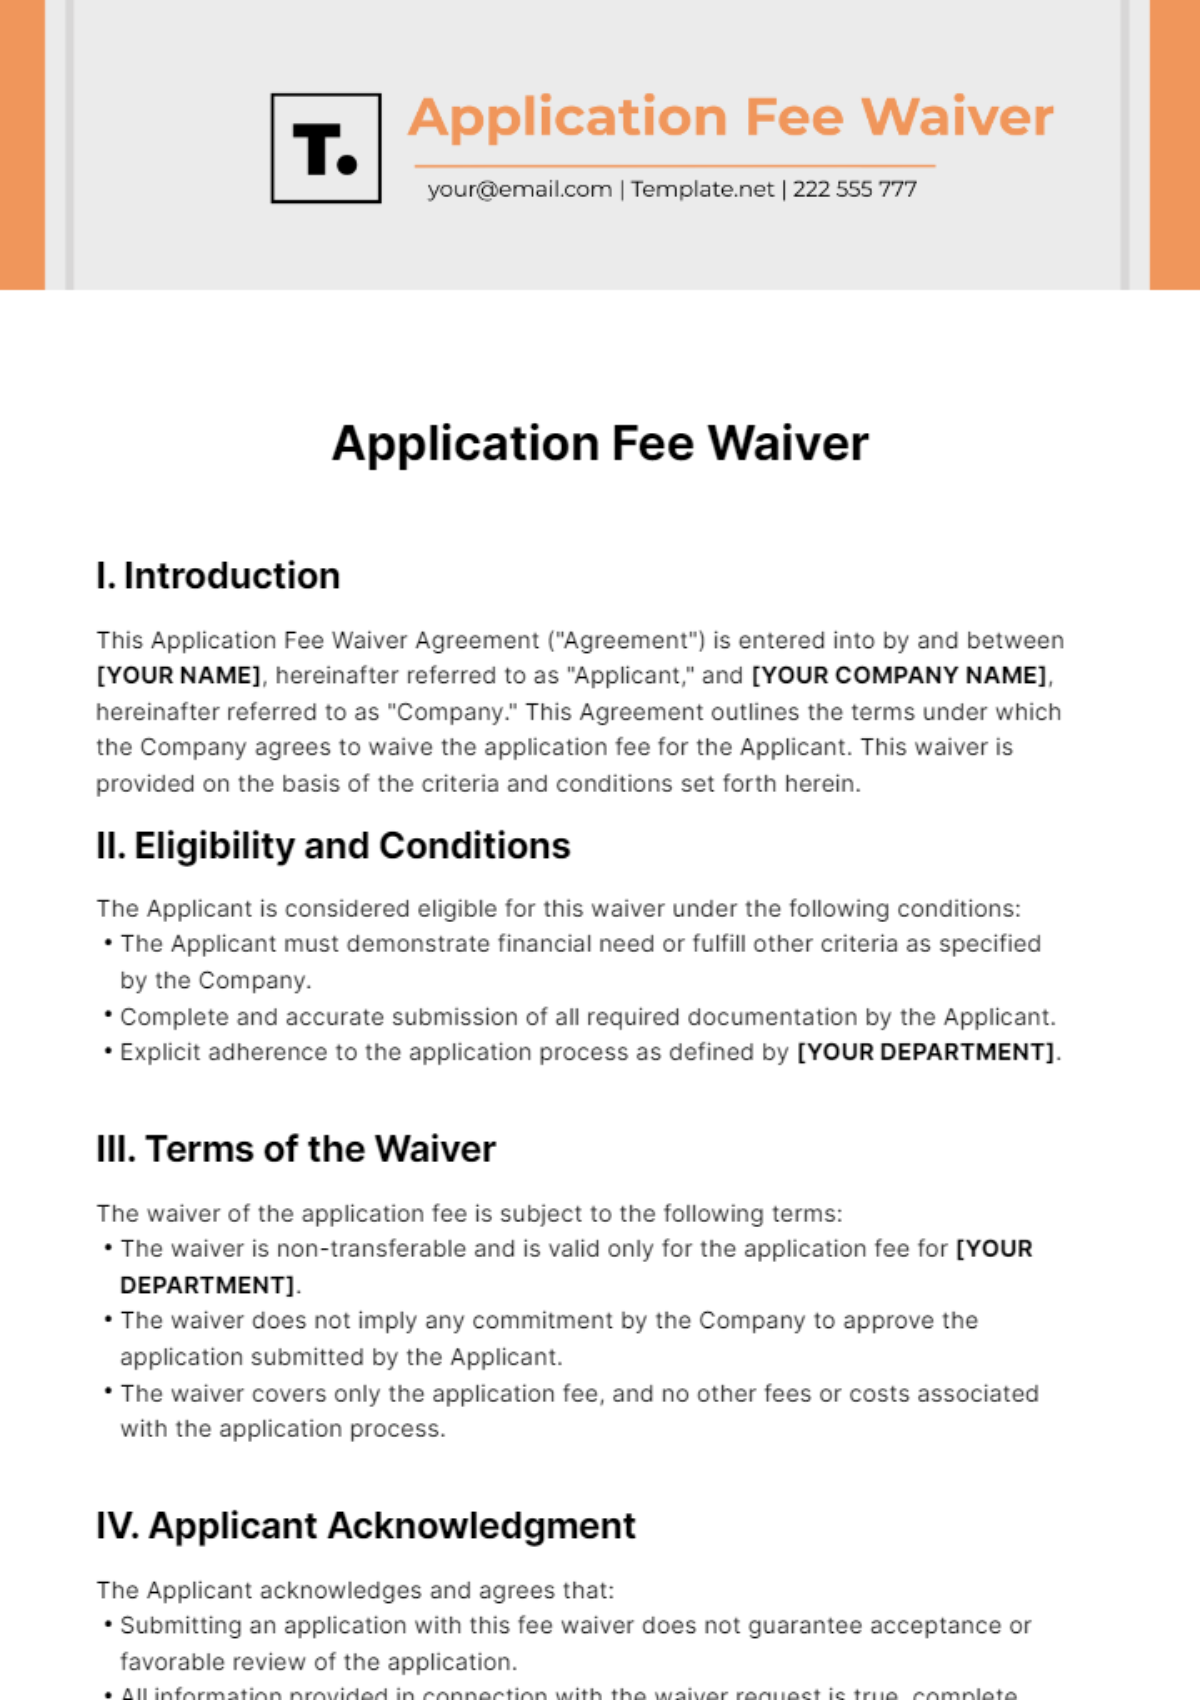 Free Application Fee Waiver Template